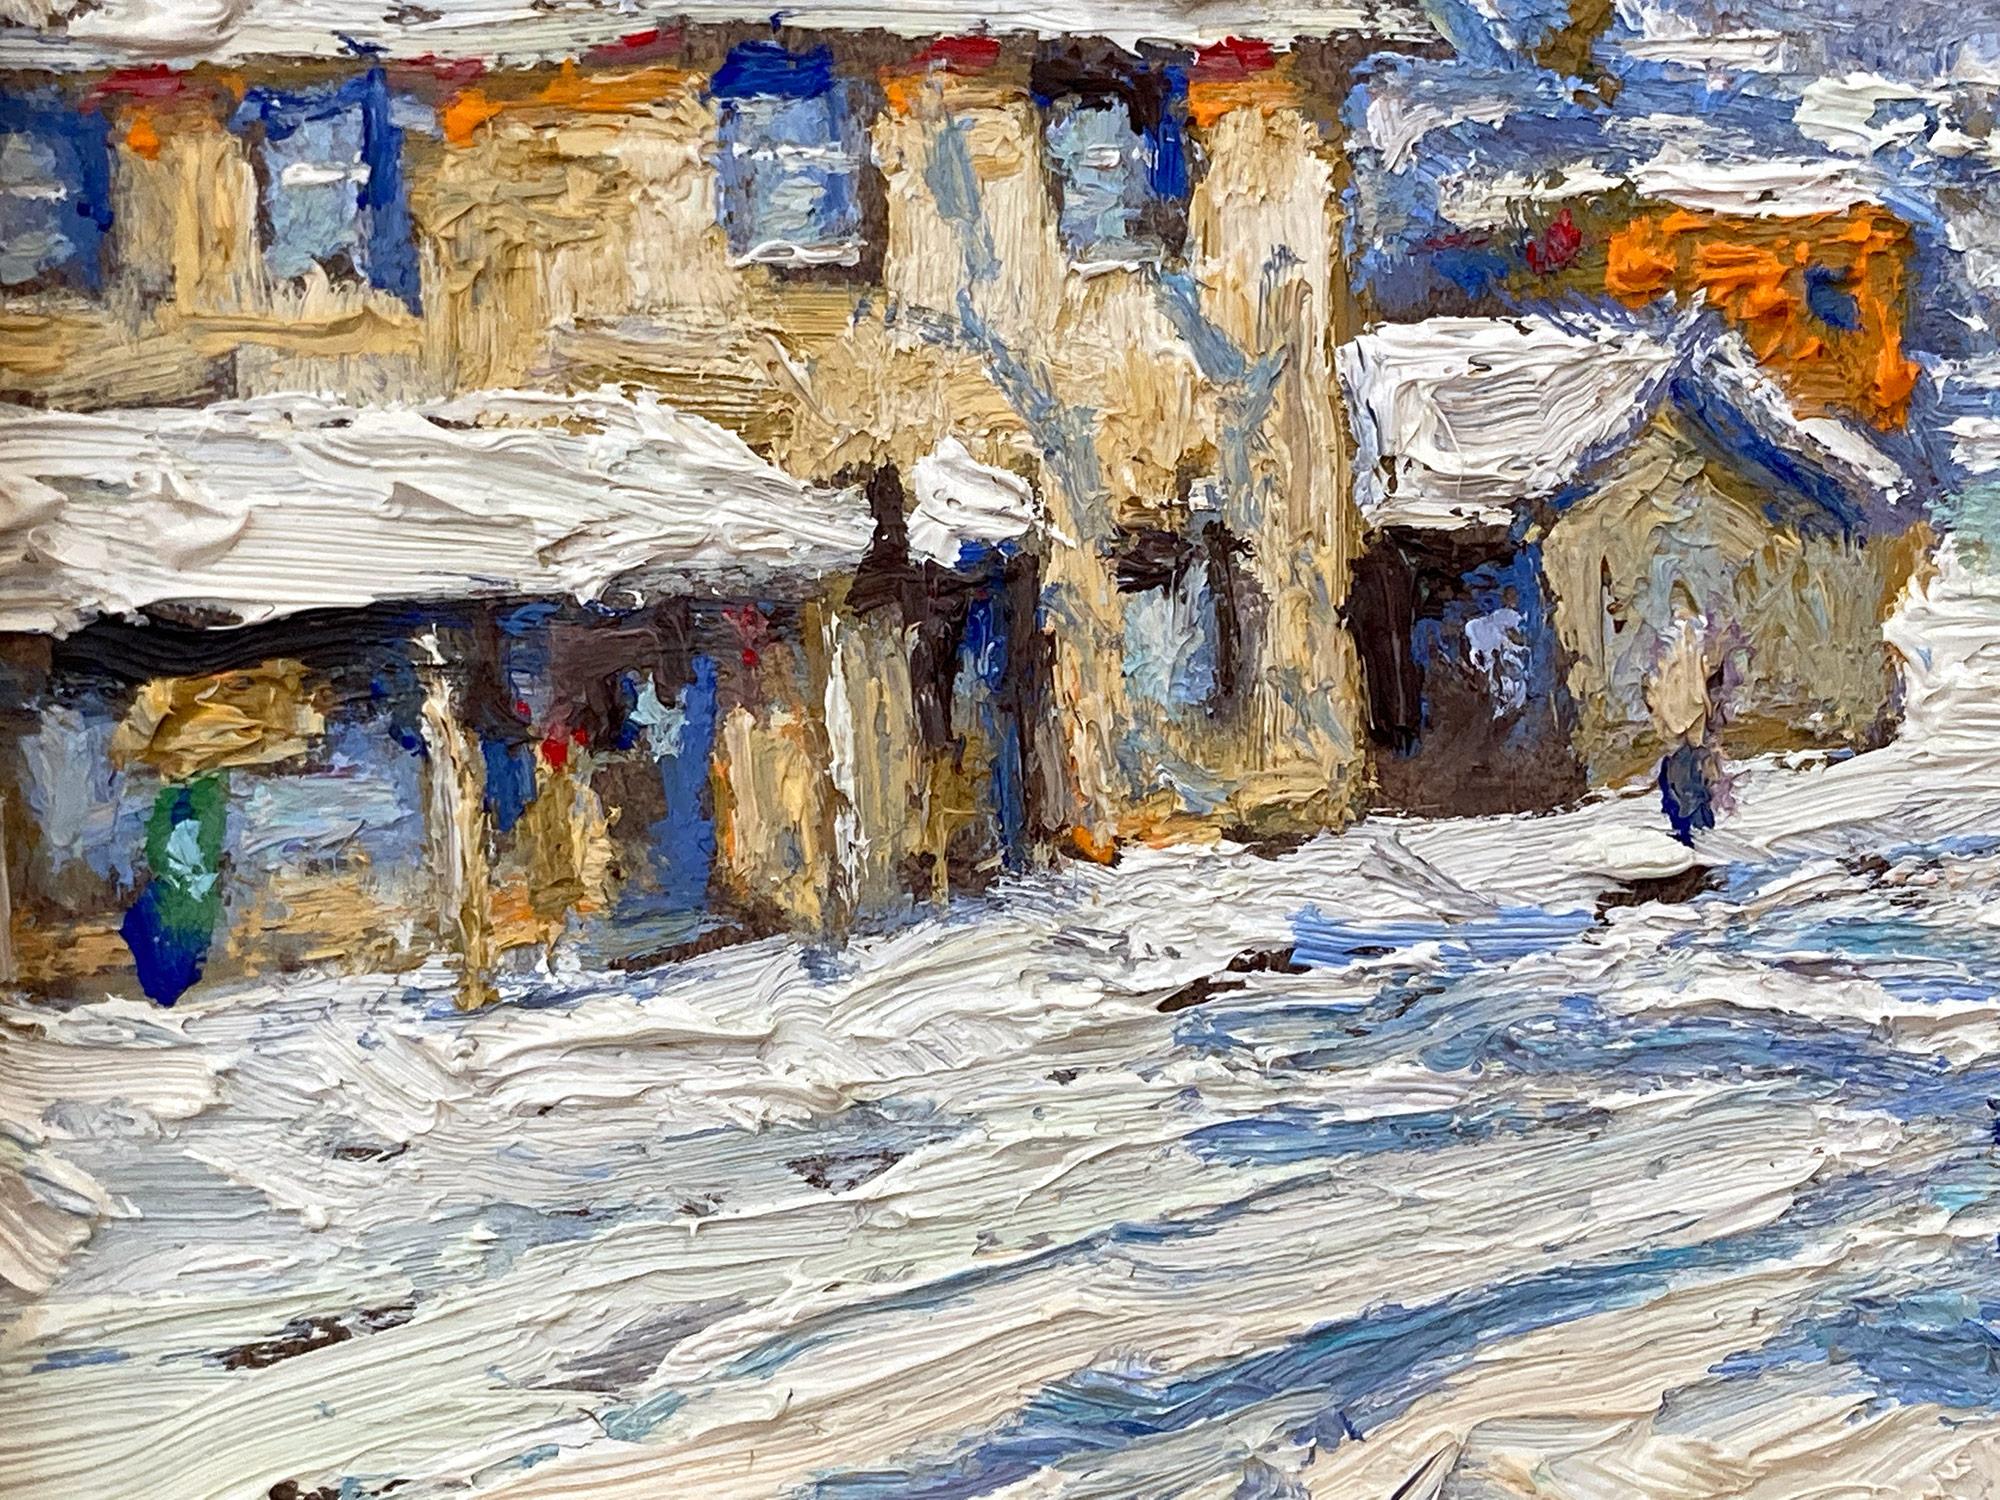 Impressionist winter pastoral scene of a quaint snow covered farm houses near Buckingham, Bucks County, PA. Willet has portrayed this piece in a most intimate, yet energetic way, and has packed much feeling into this miniature work. It is almost as